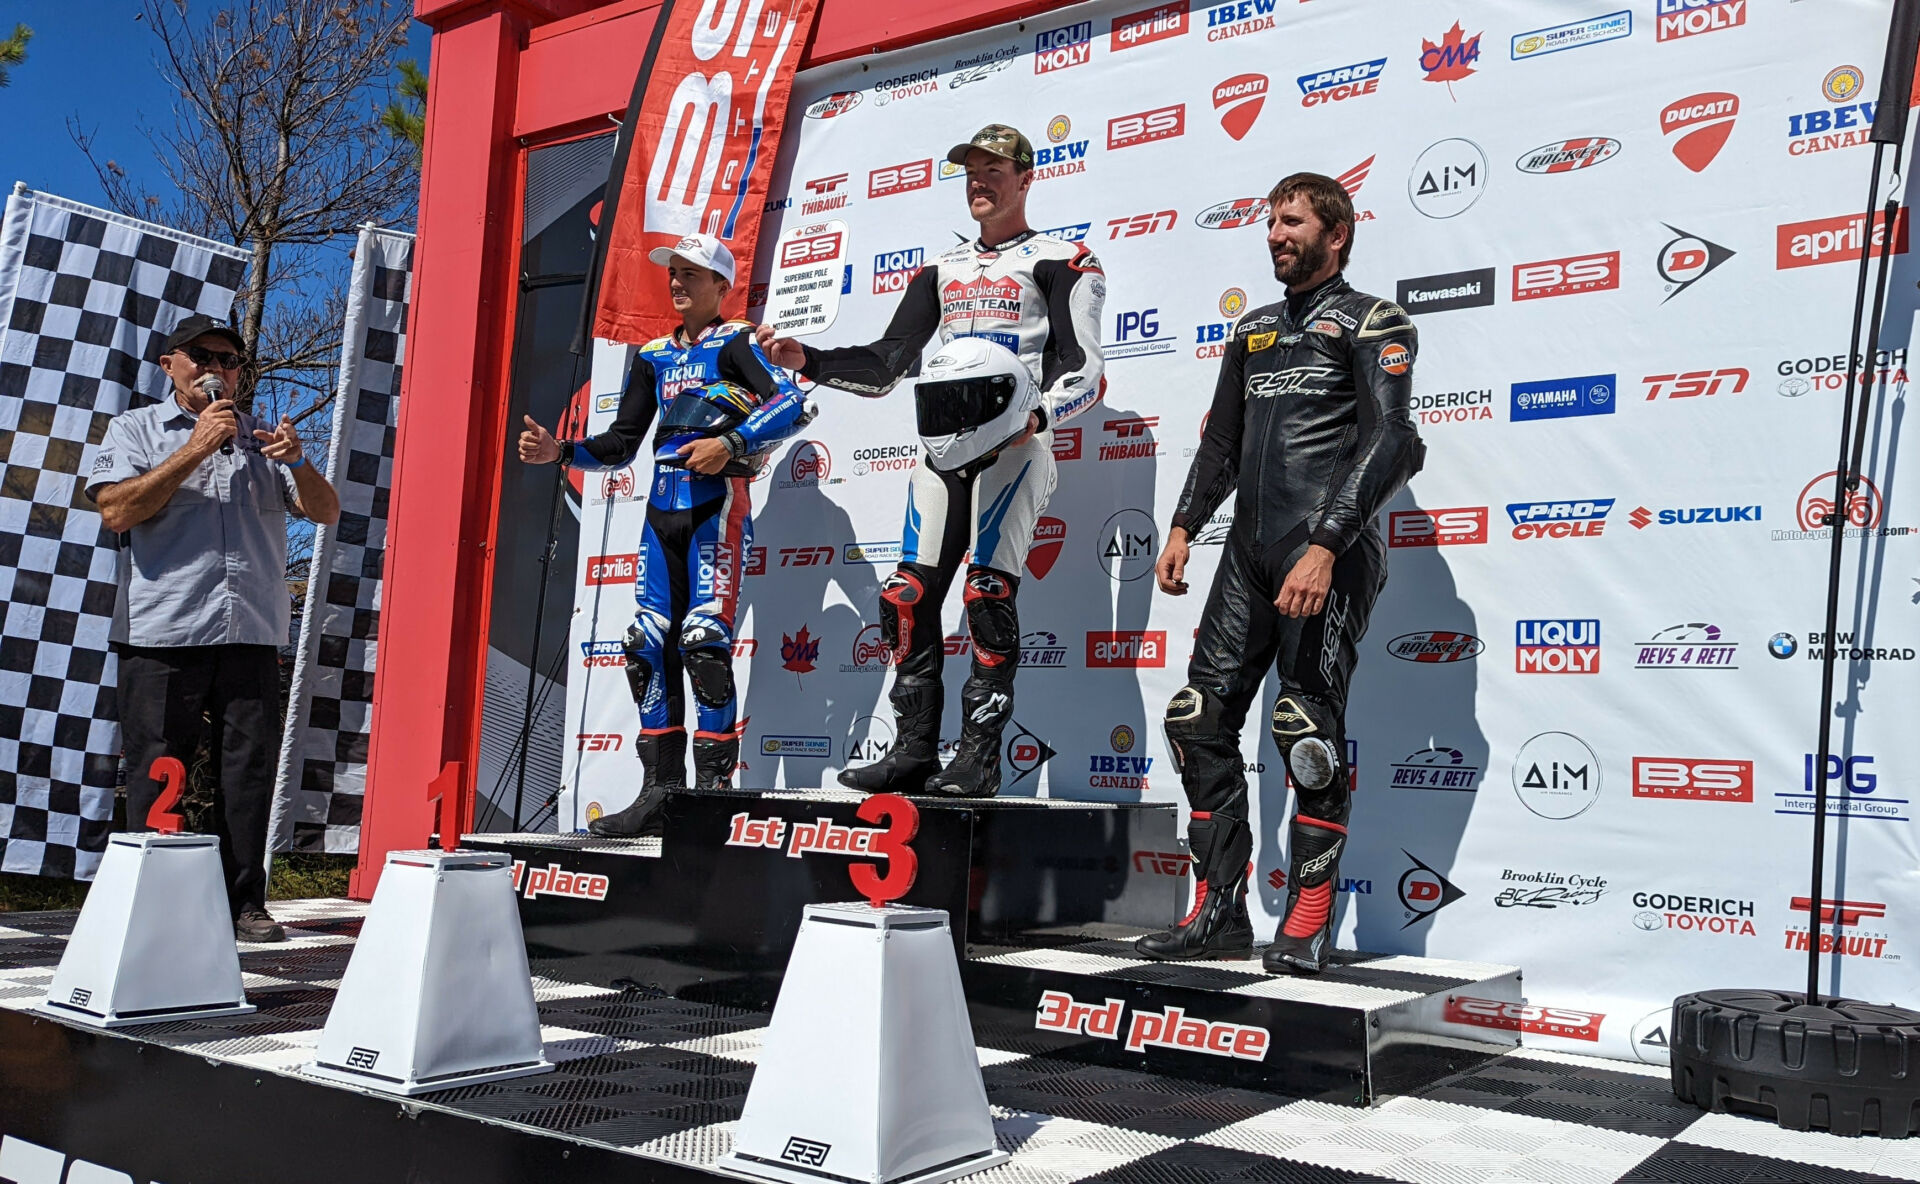 At the final CSBK round of 2022 at CTMP, BS Battery Pole winner and overall Pole Champion Ben Young (center) celebrates on Friday’s Qualifying Podium with Suzuki’s Alex Dumas (left) and Kawasaki’s Sebastien Tremblay (right). Photo by Colin Fraser, courtesy CSBK.